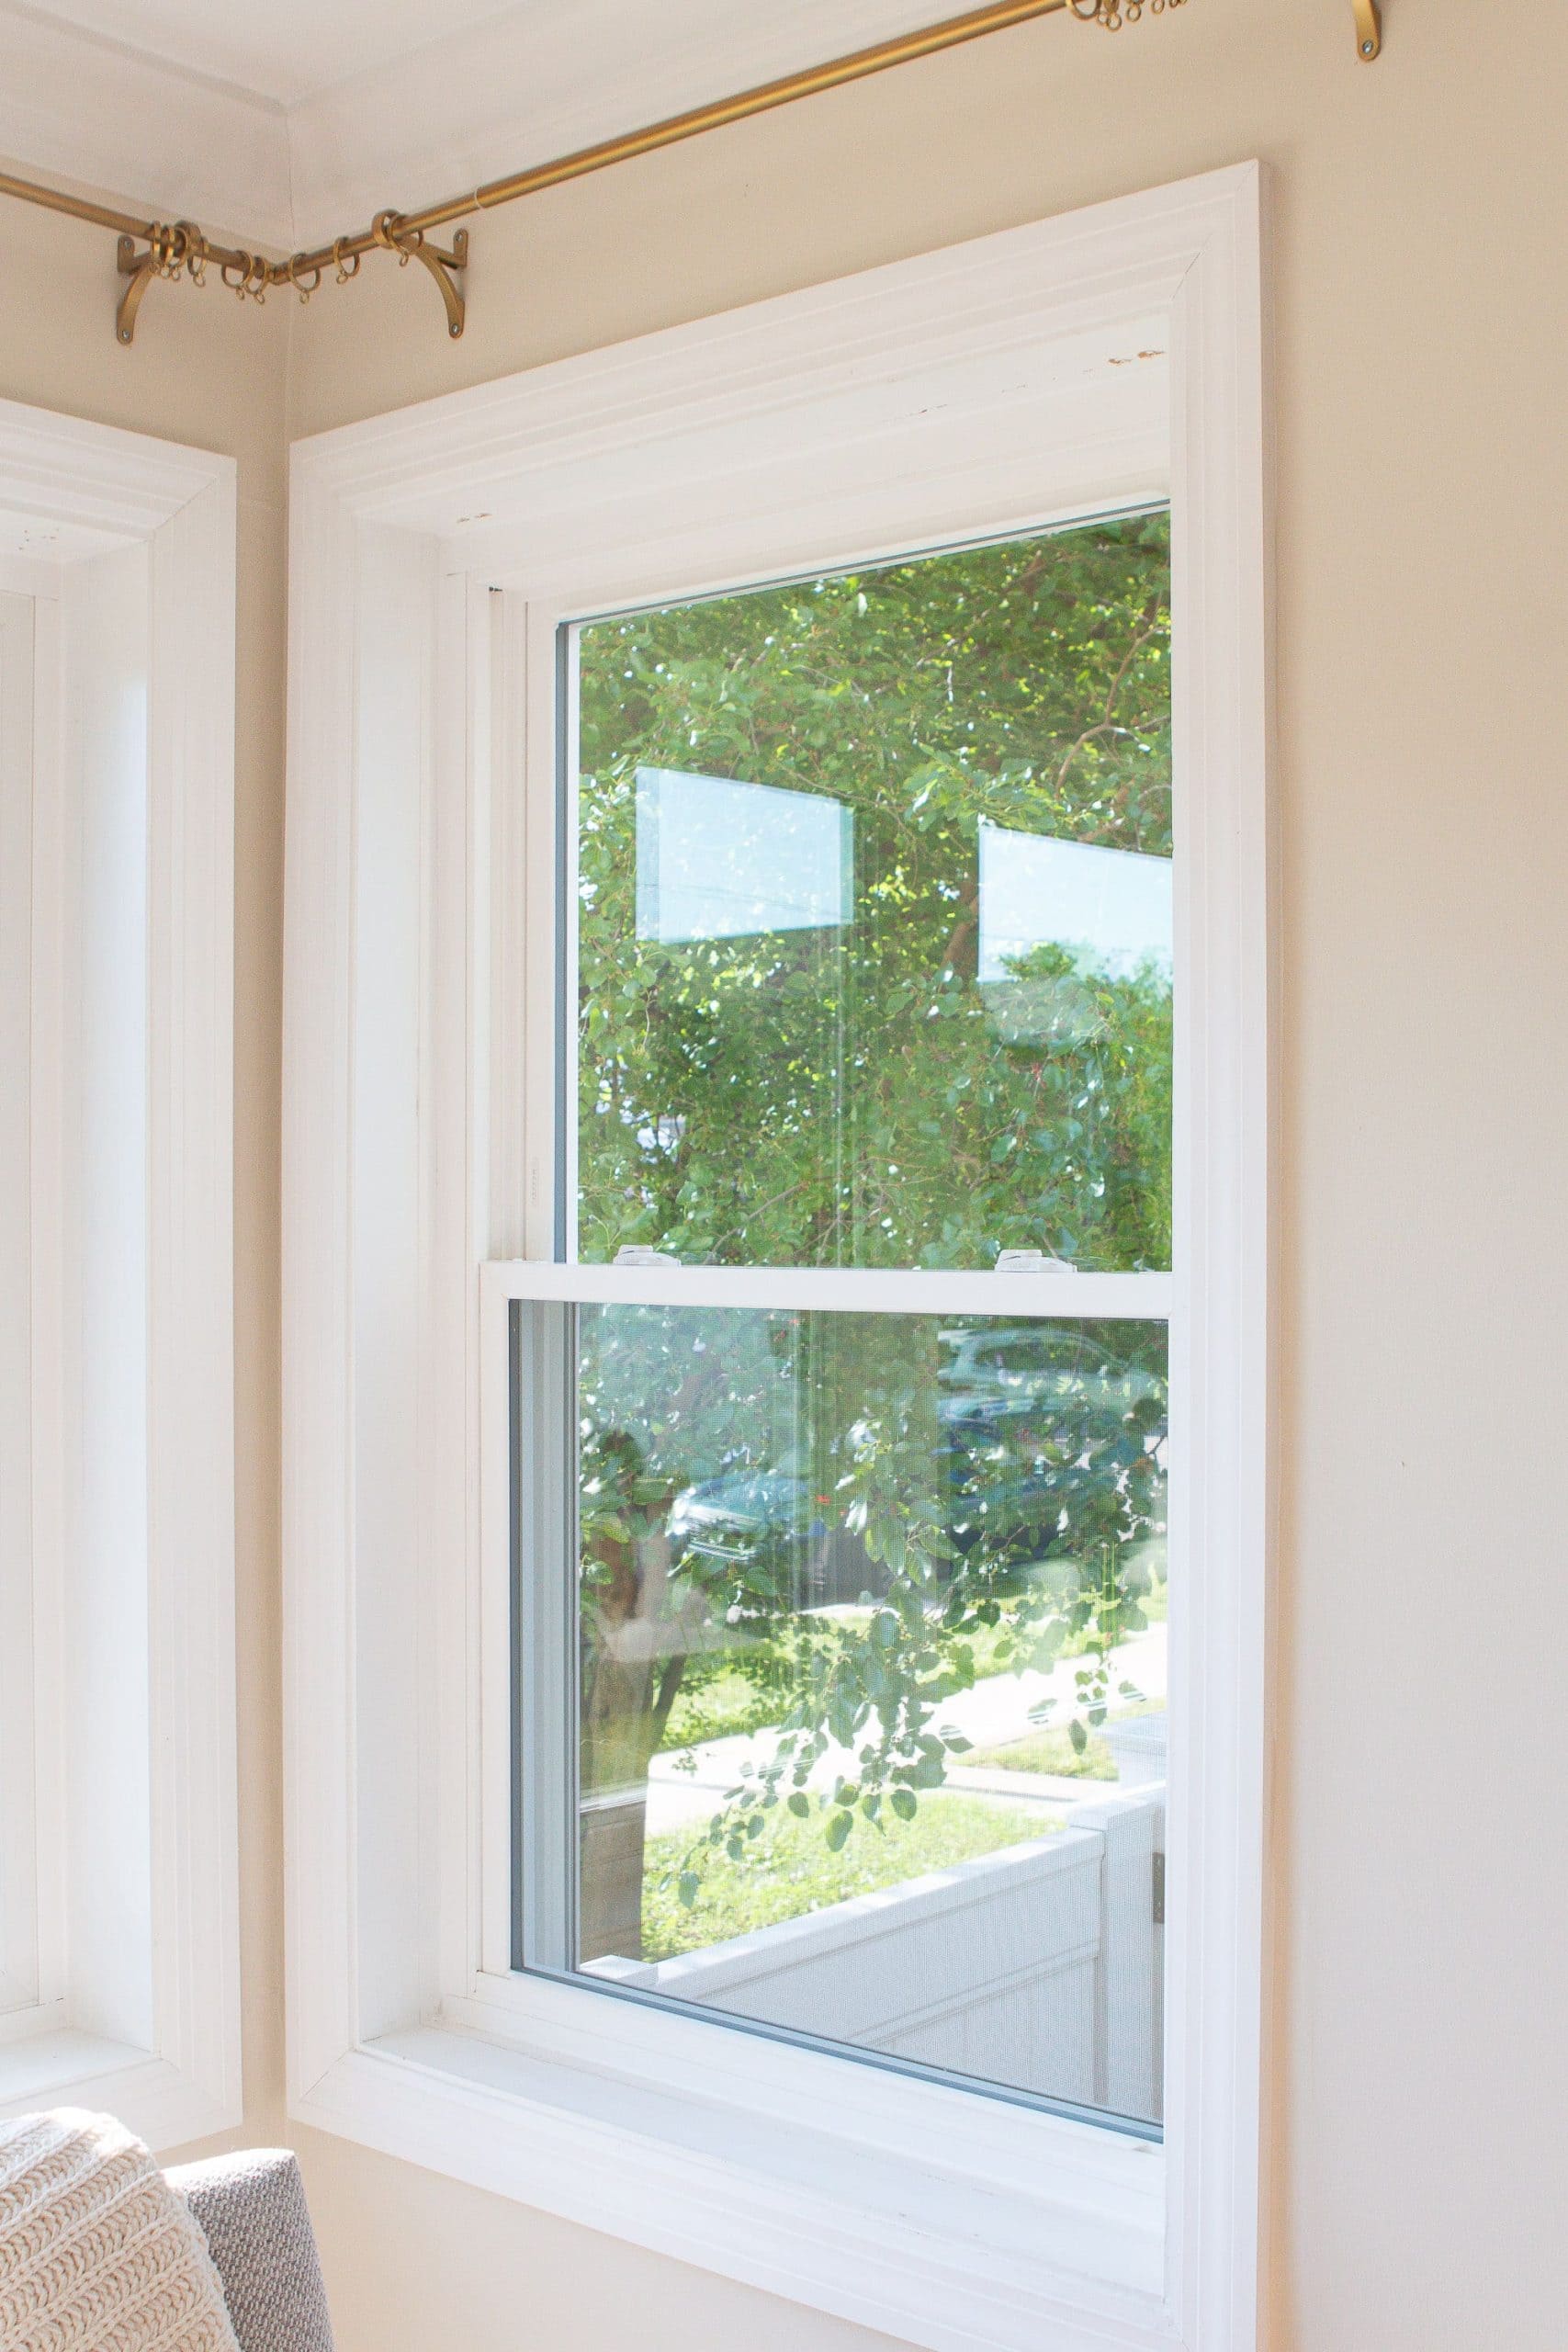 Choosing double-hung windows for our home